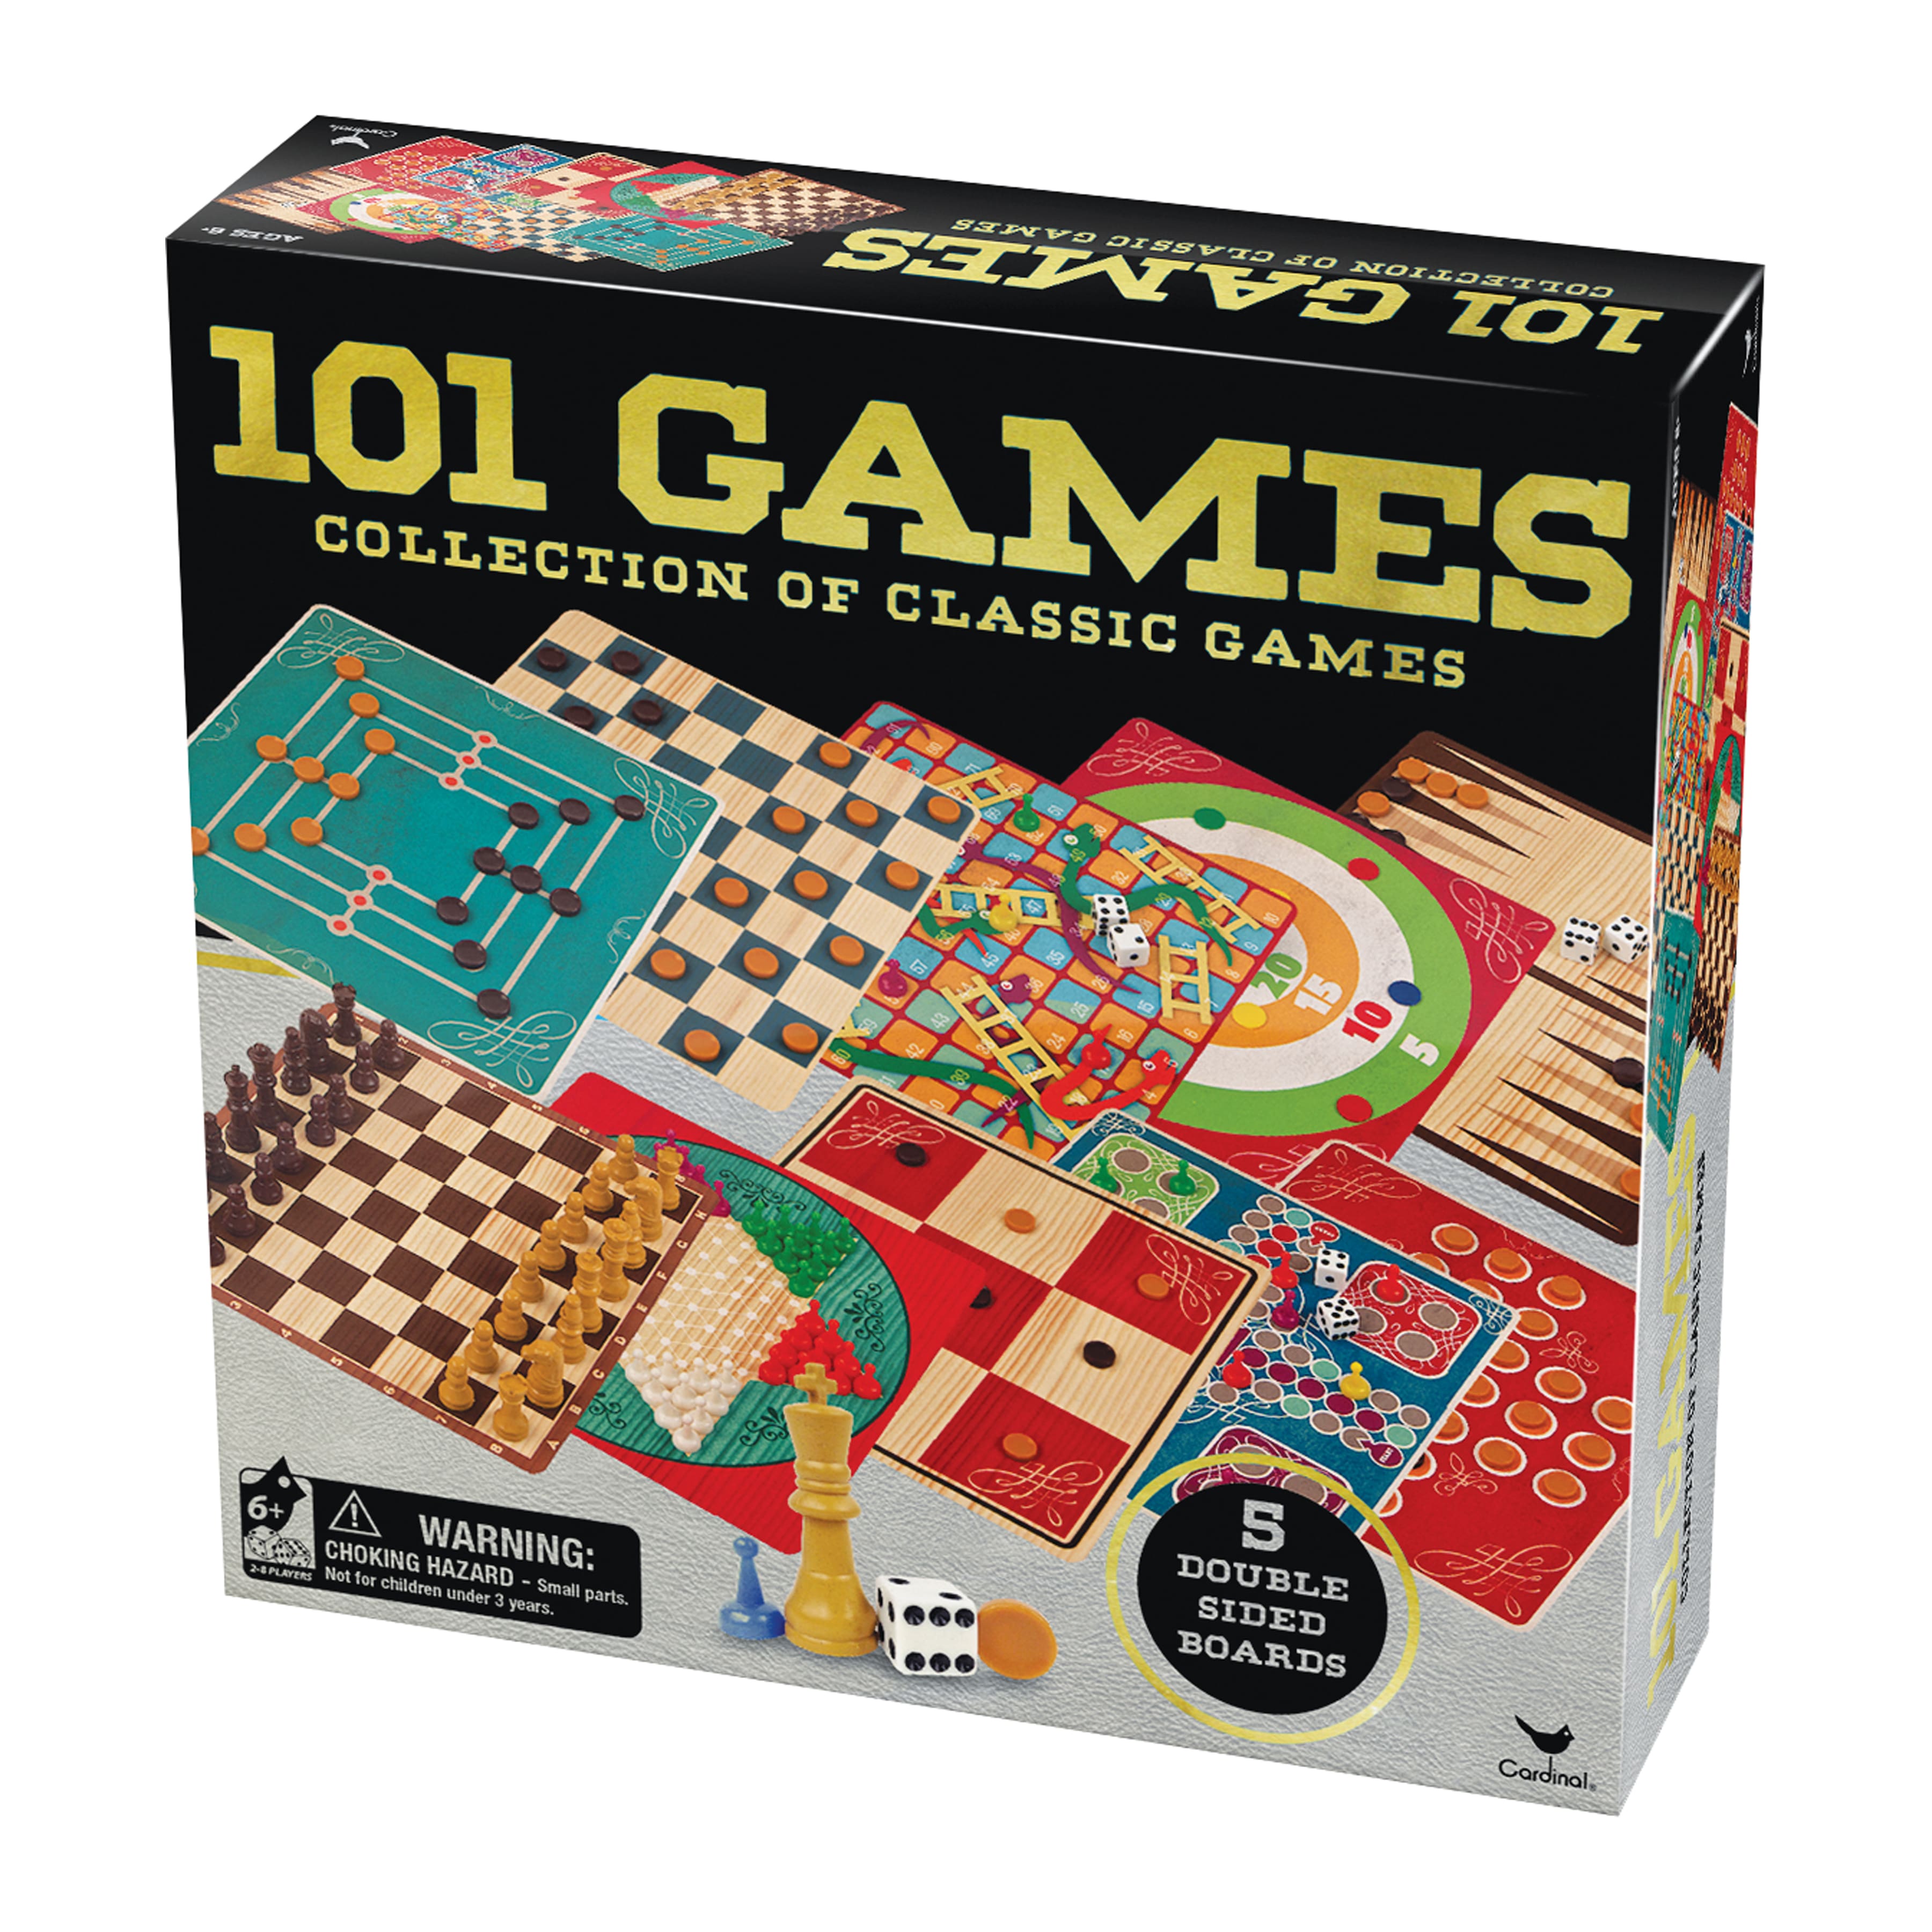 101 Games - Collection of Classic Games